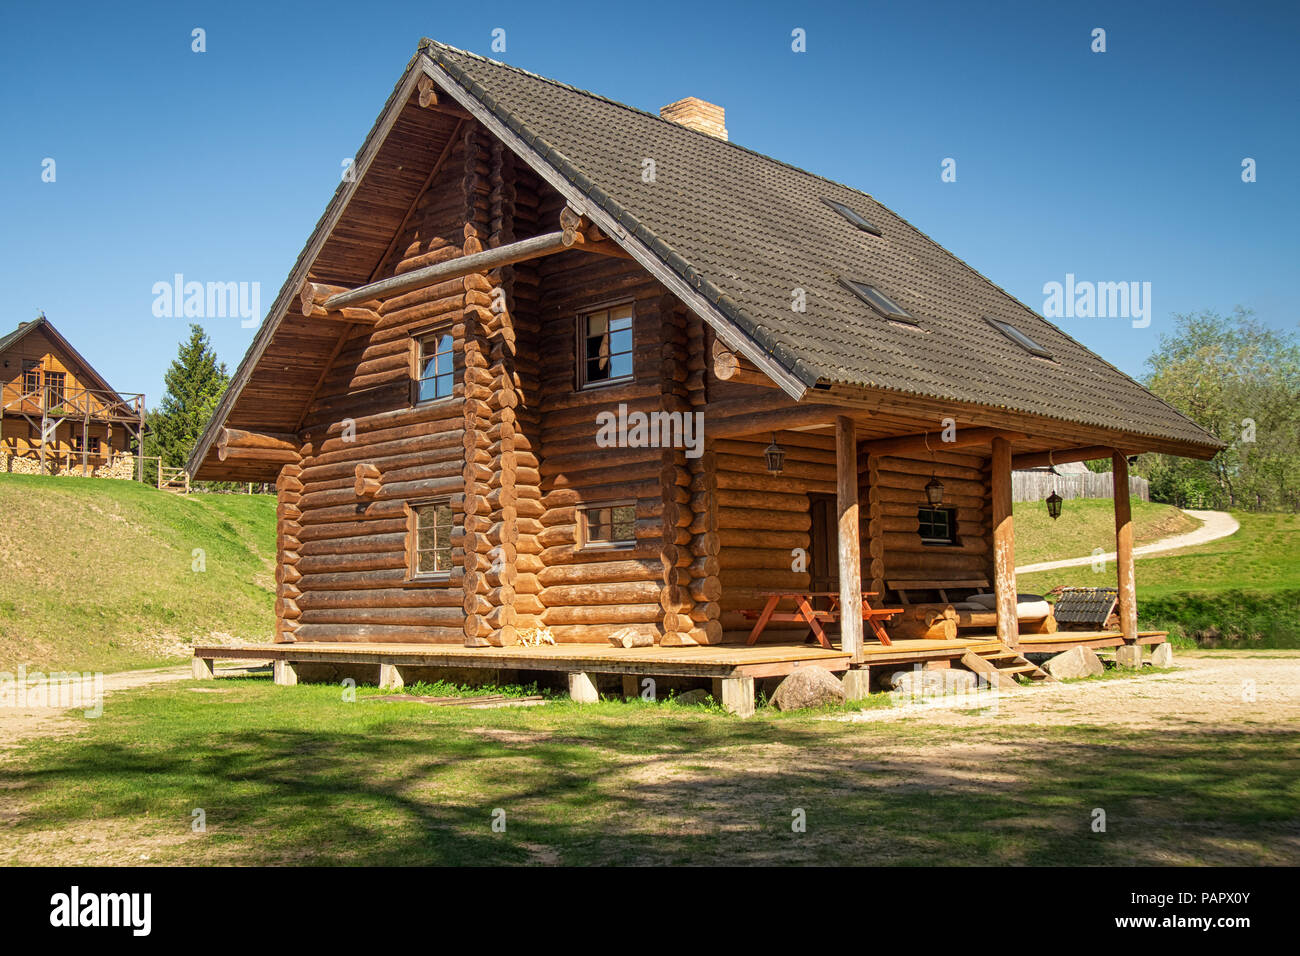 Log house in a country side in a sunny day Stock Photo